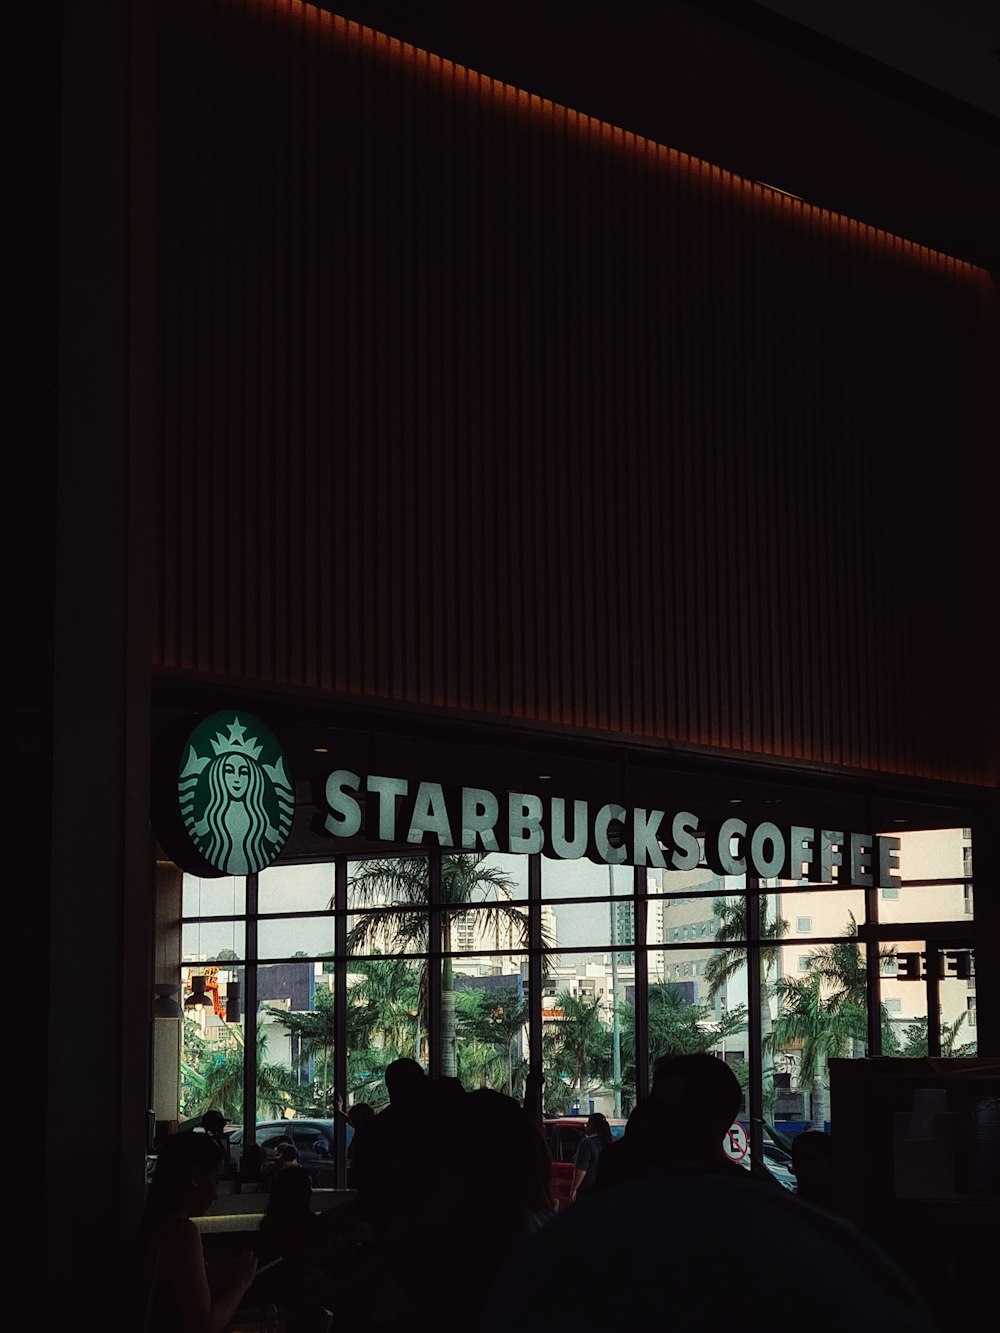 a starbucks sign is lit up in the dark